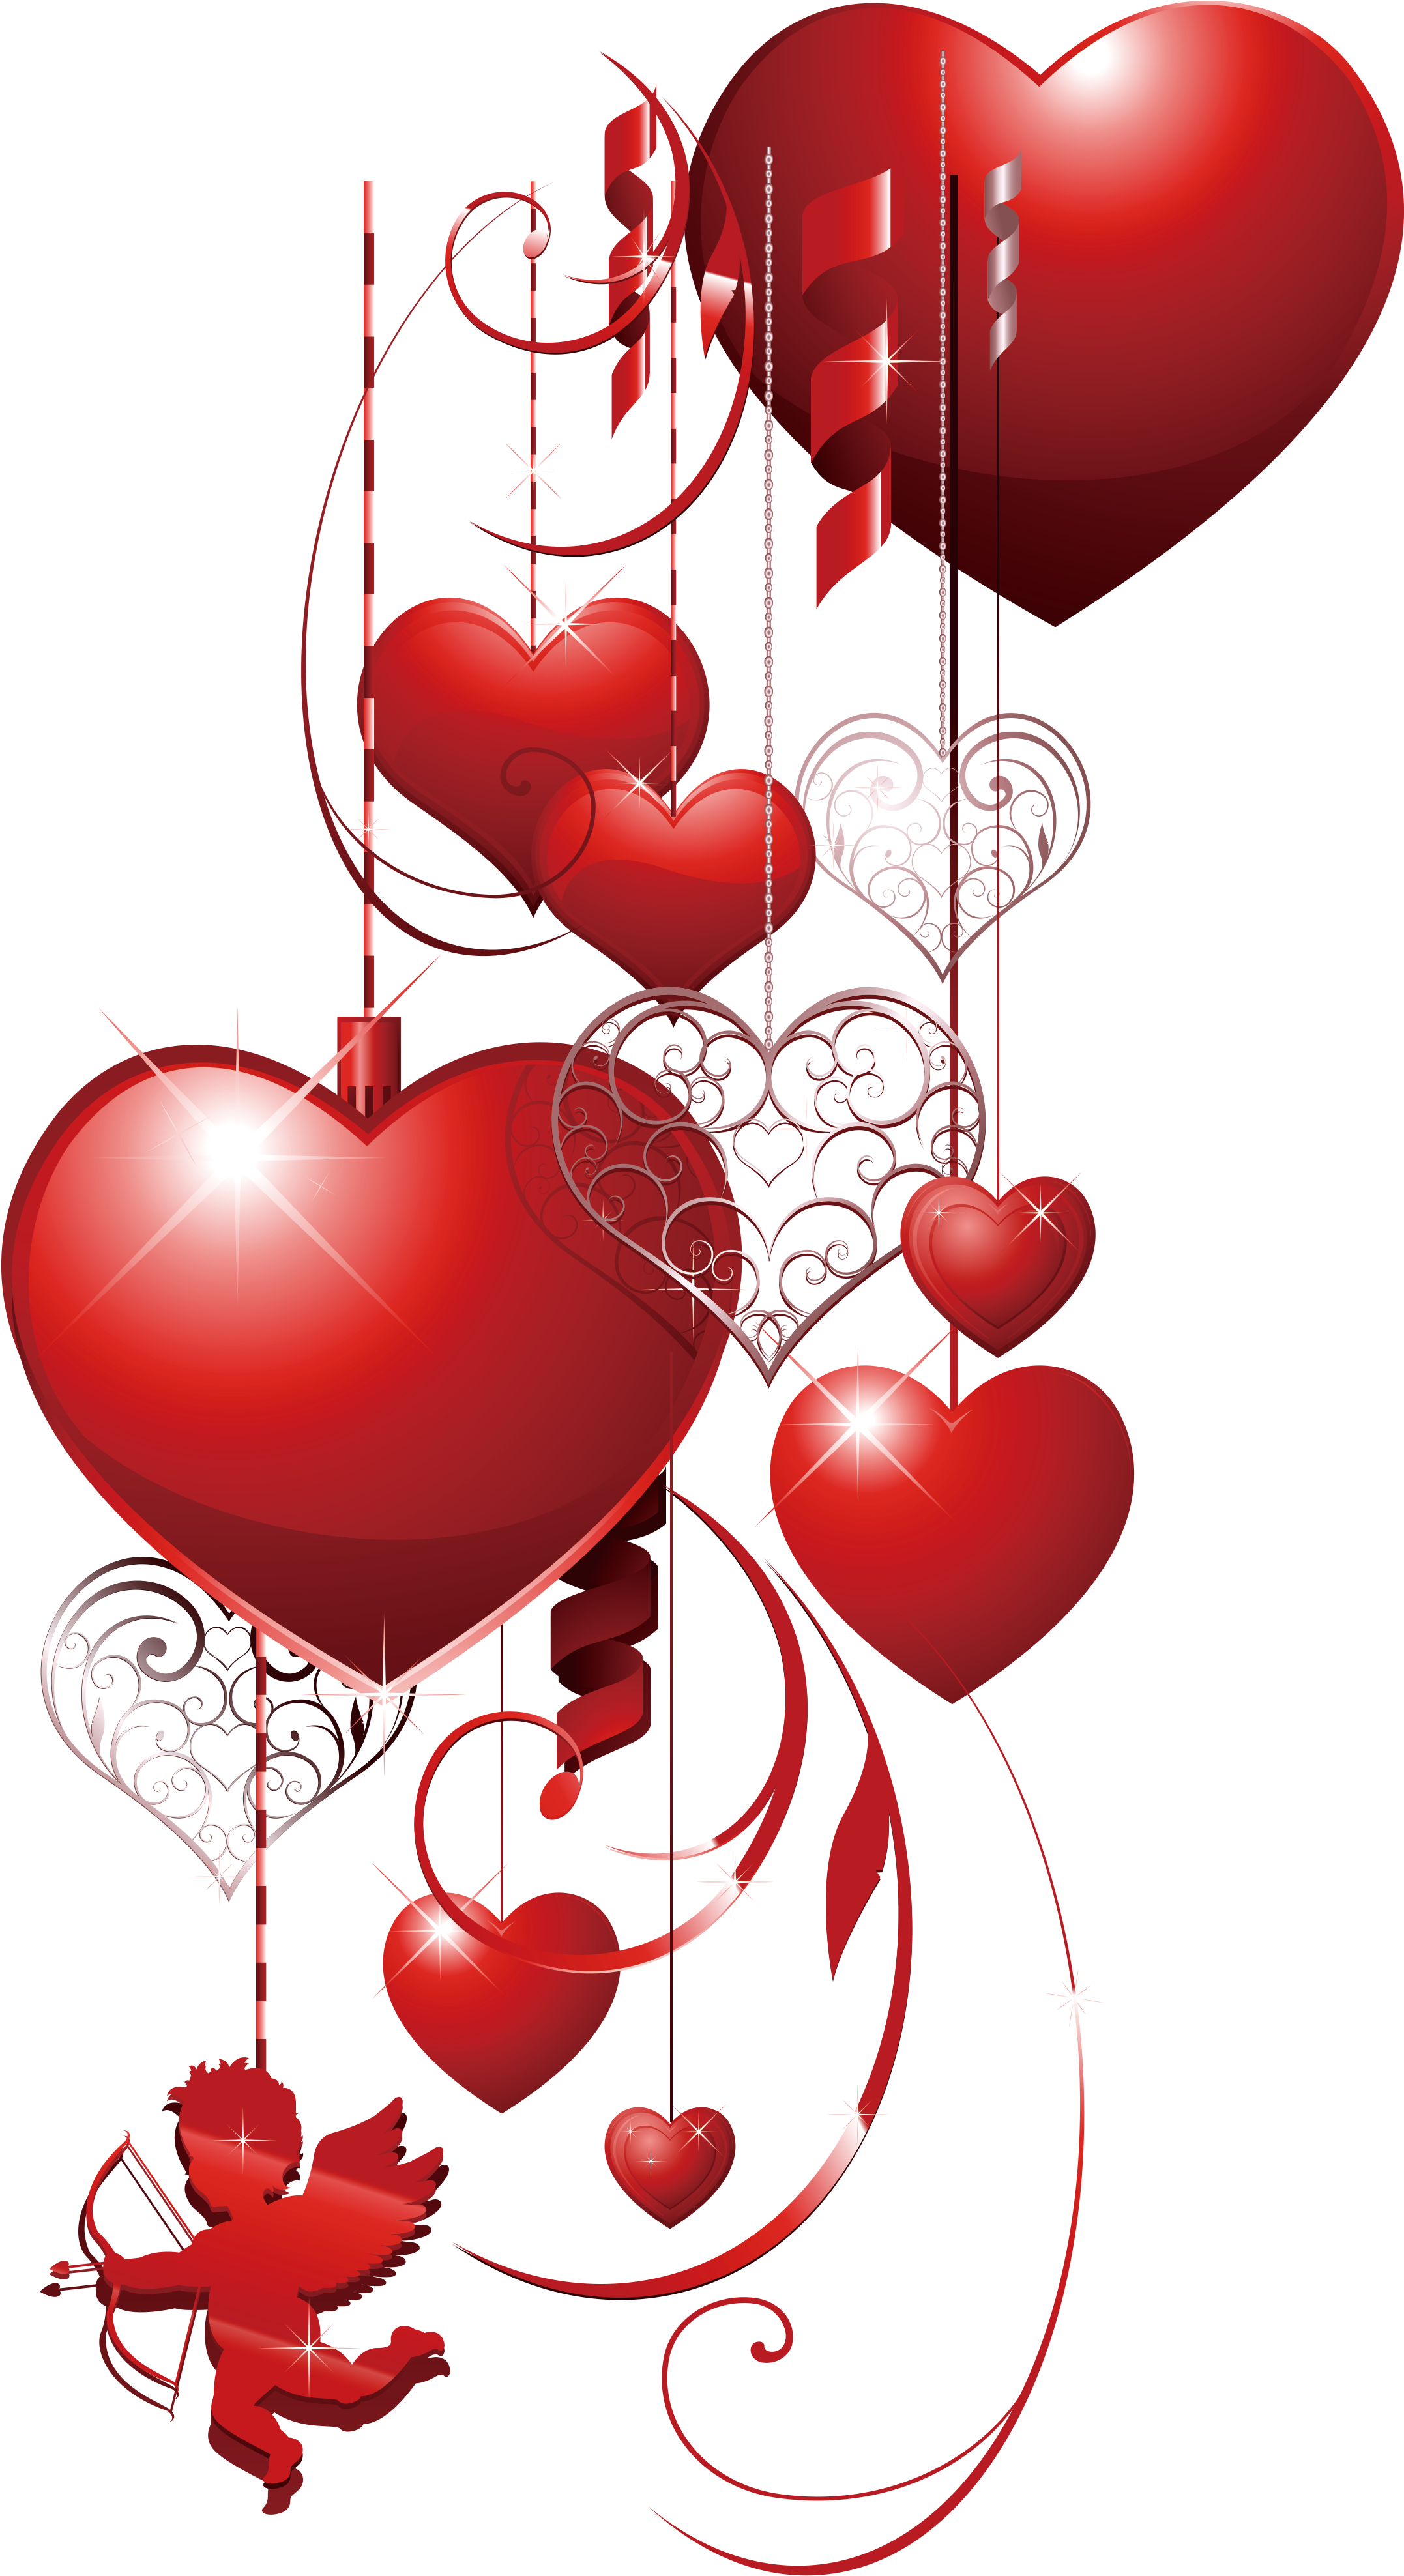 Valentines Day Heart Scalable Vector Graphics Clip - Valentines Day Heart Scalable Vector Graphics Clip (3543x5315)